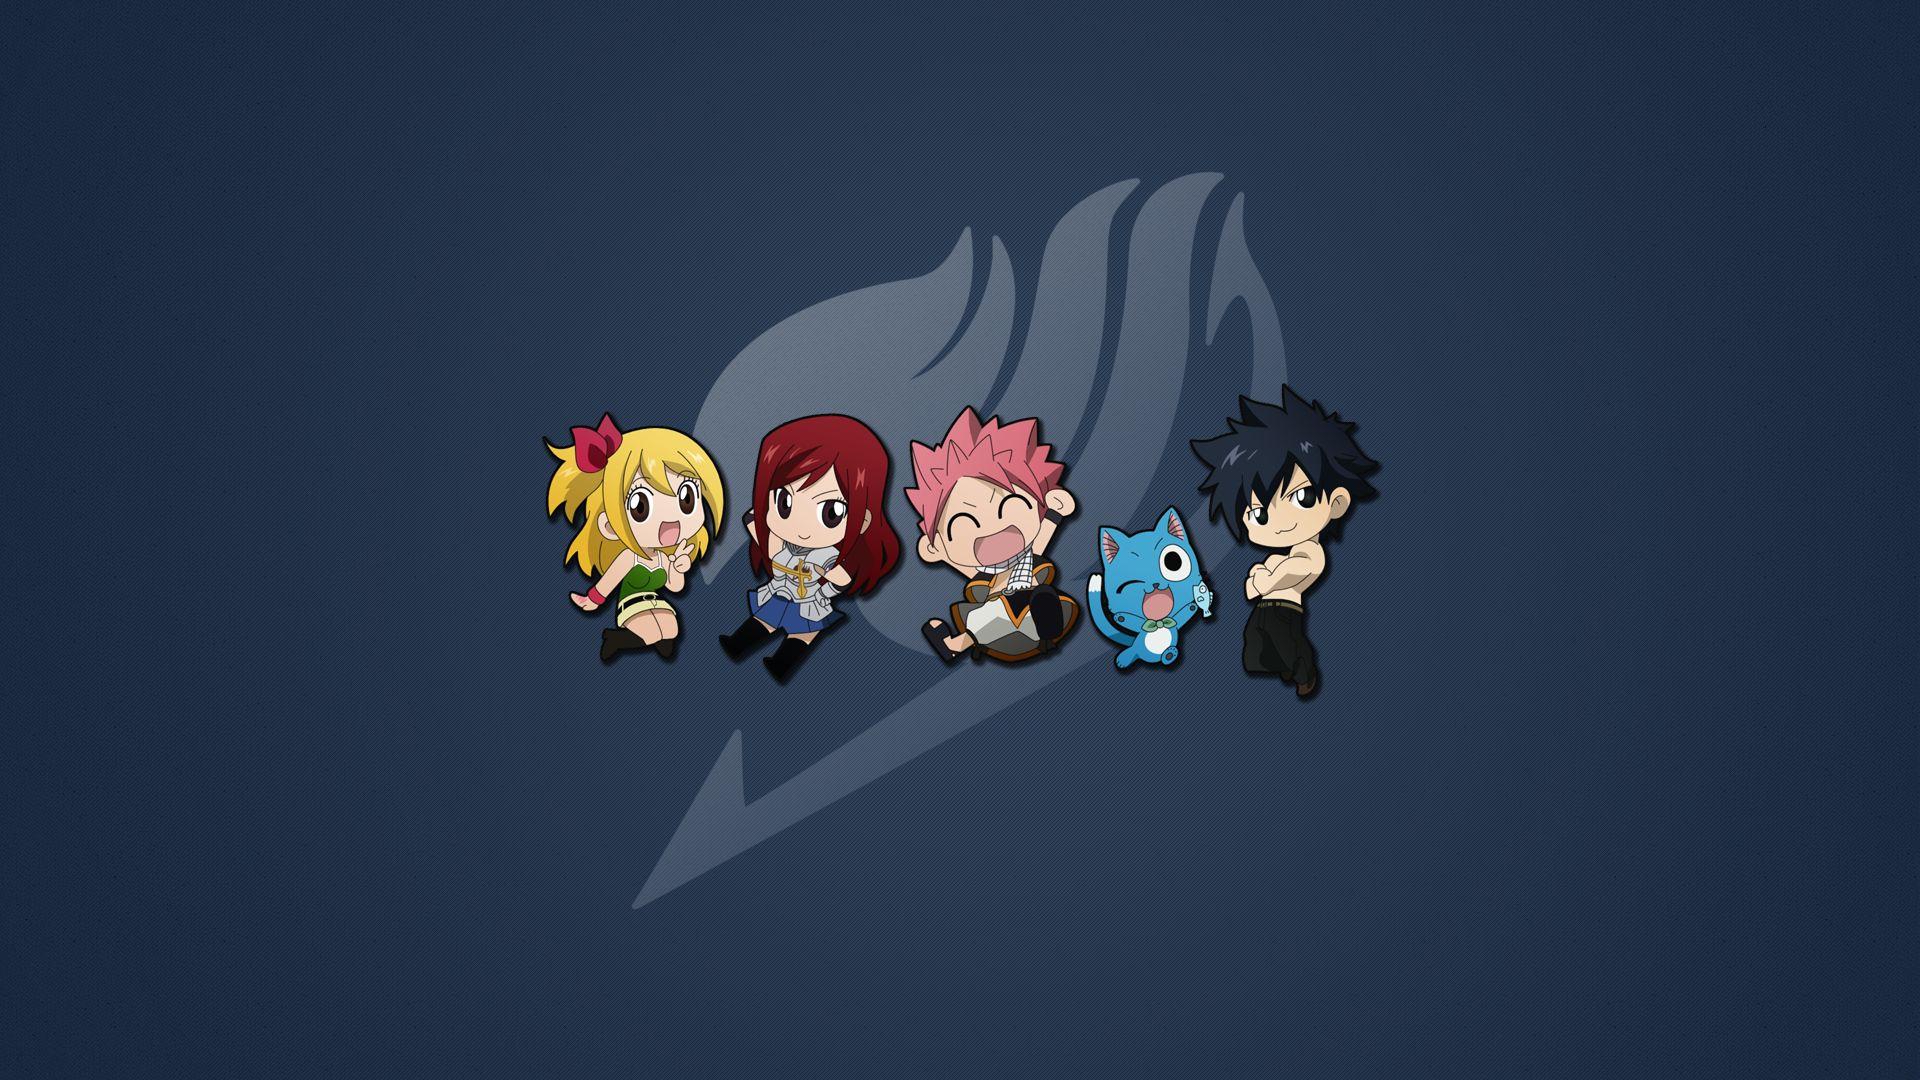 Anime Hd Fairy Tail Wallpapers Wallpaper Cave